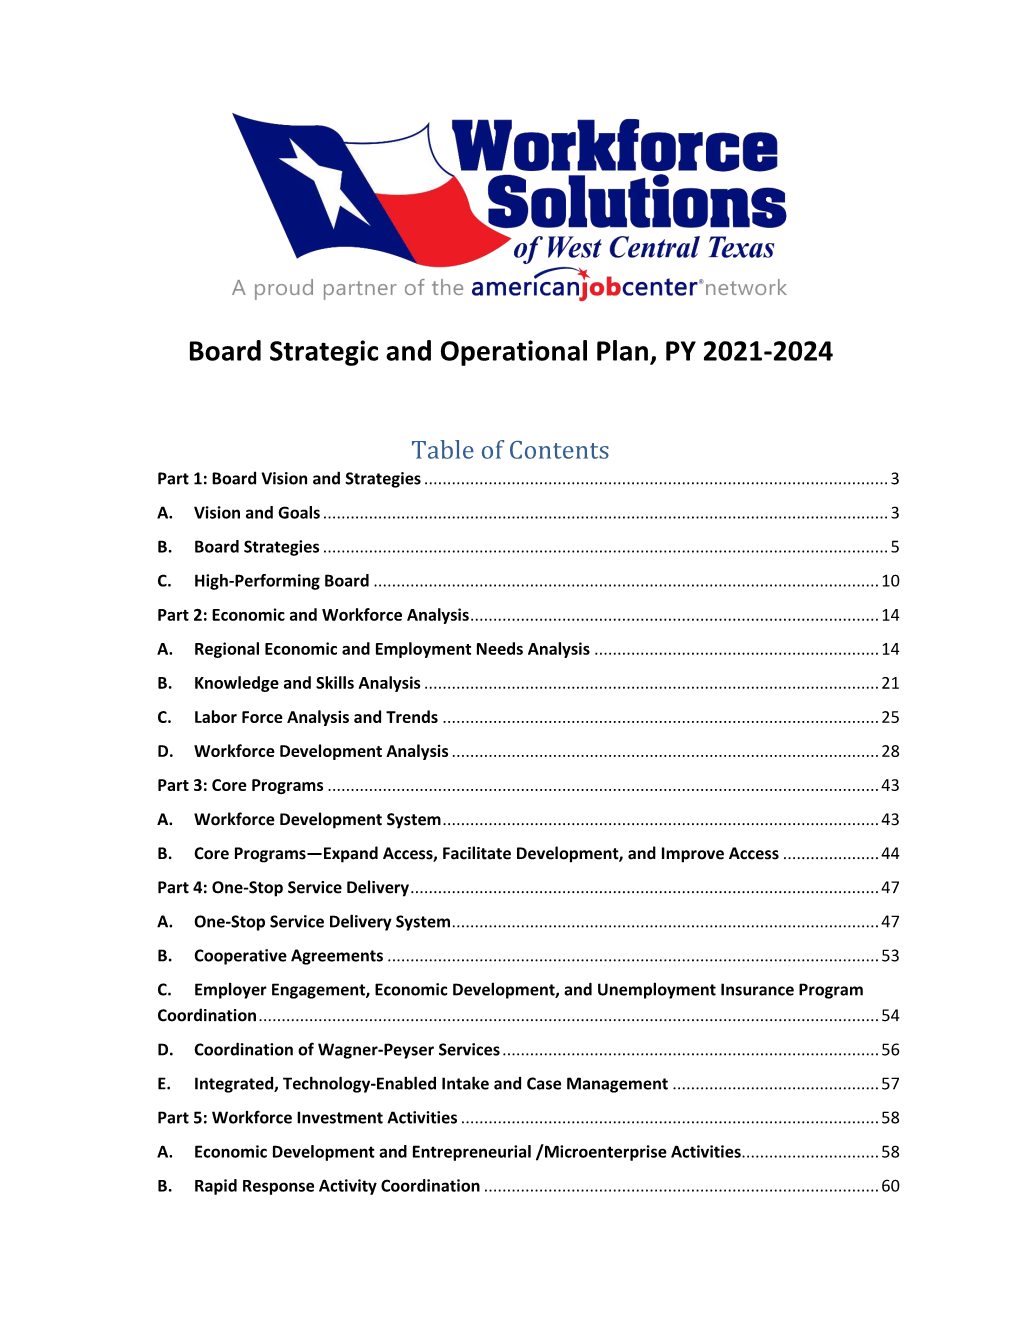 WSWCT Board Strategic and Operational Plan PY